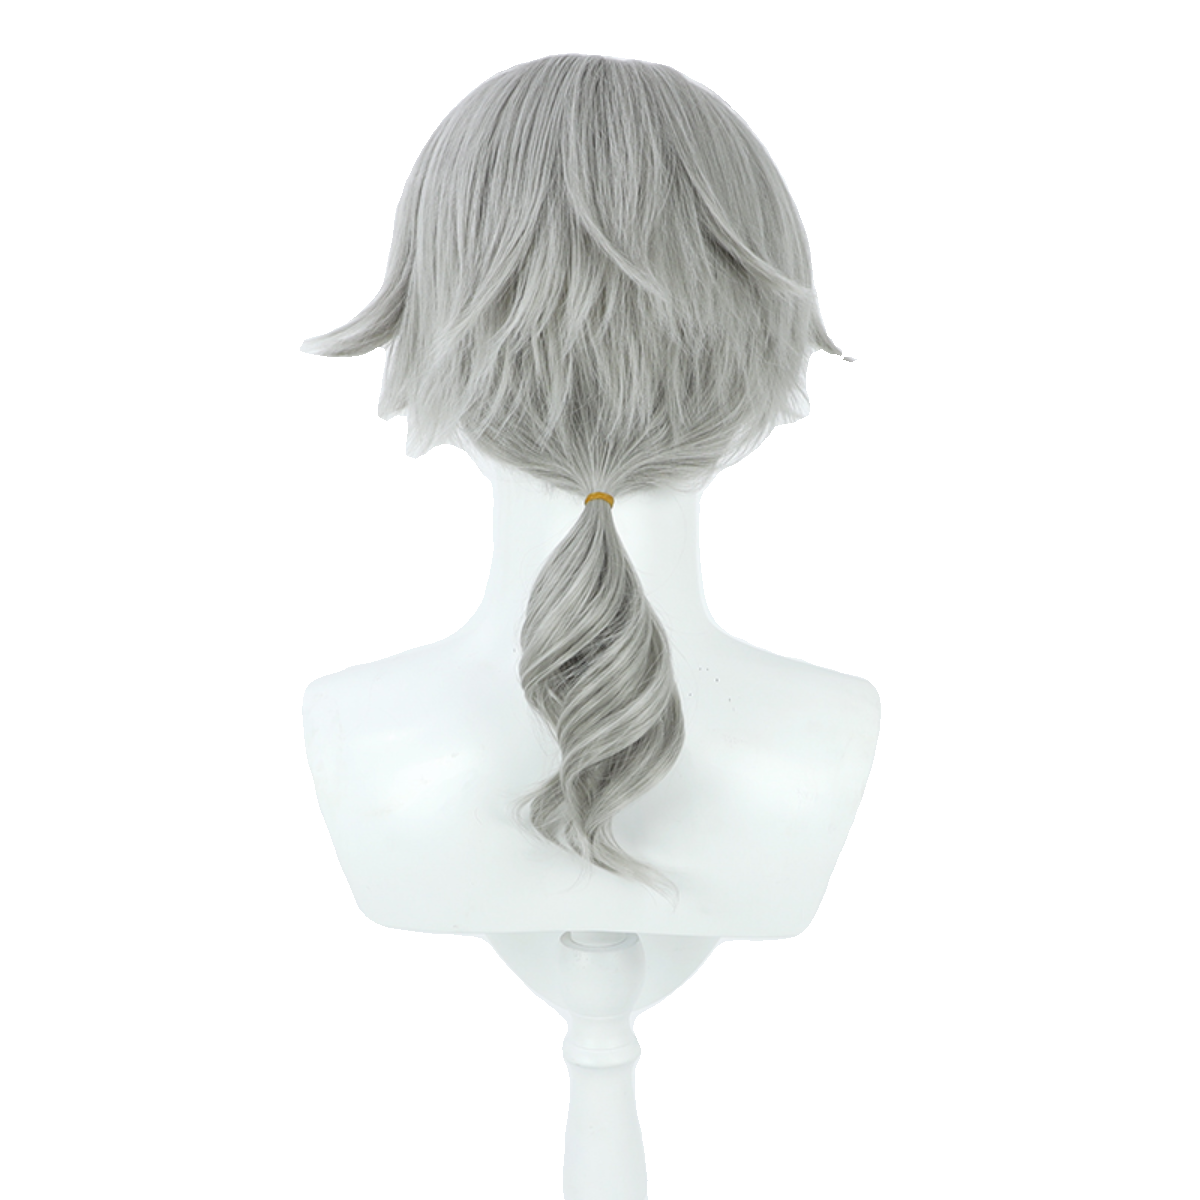 Identity V Truth and Inference Embalmer Aesop Carl 5th Anniversary Costume Cosplay Wig